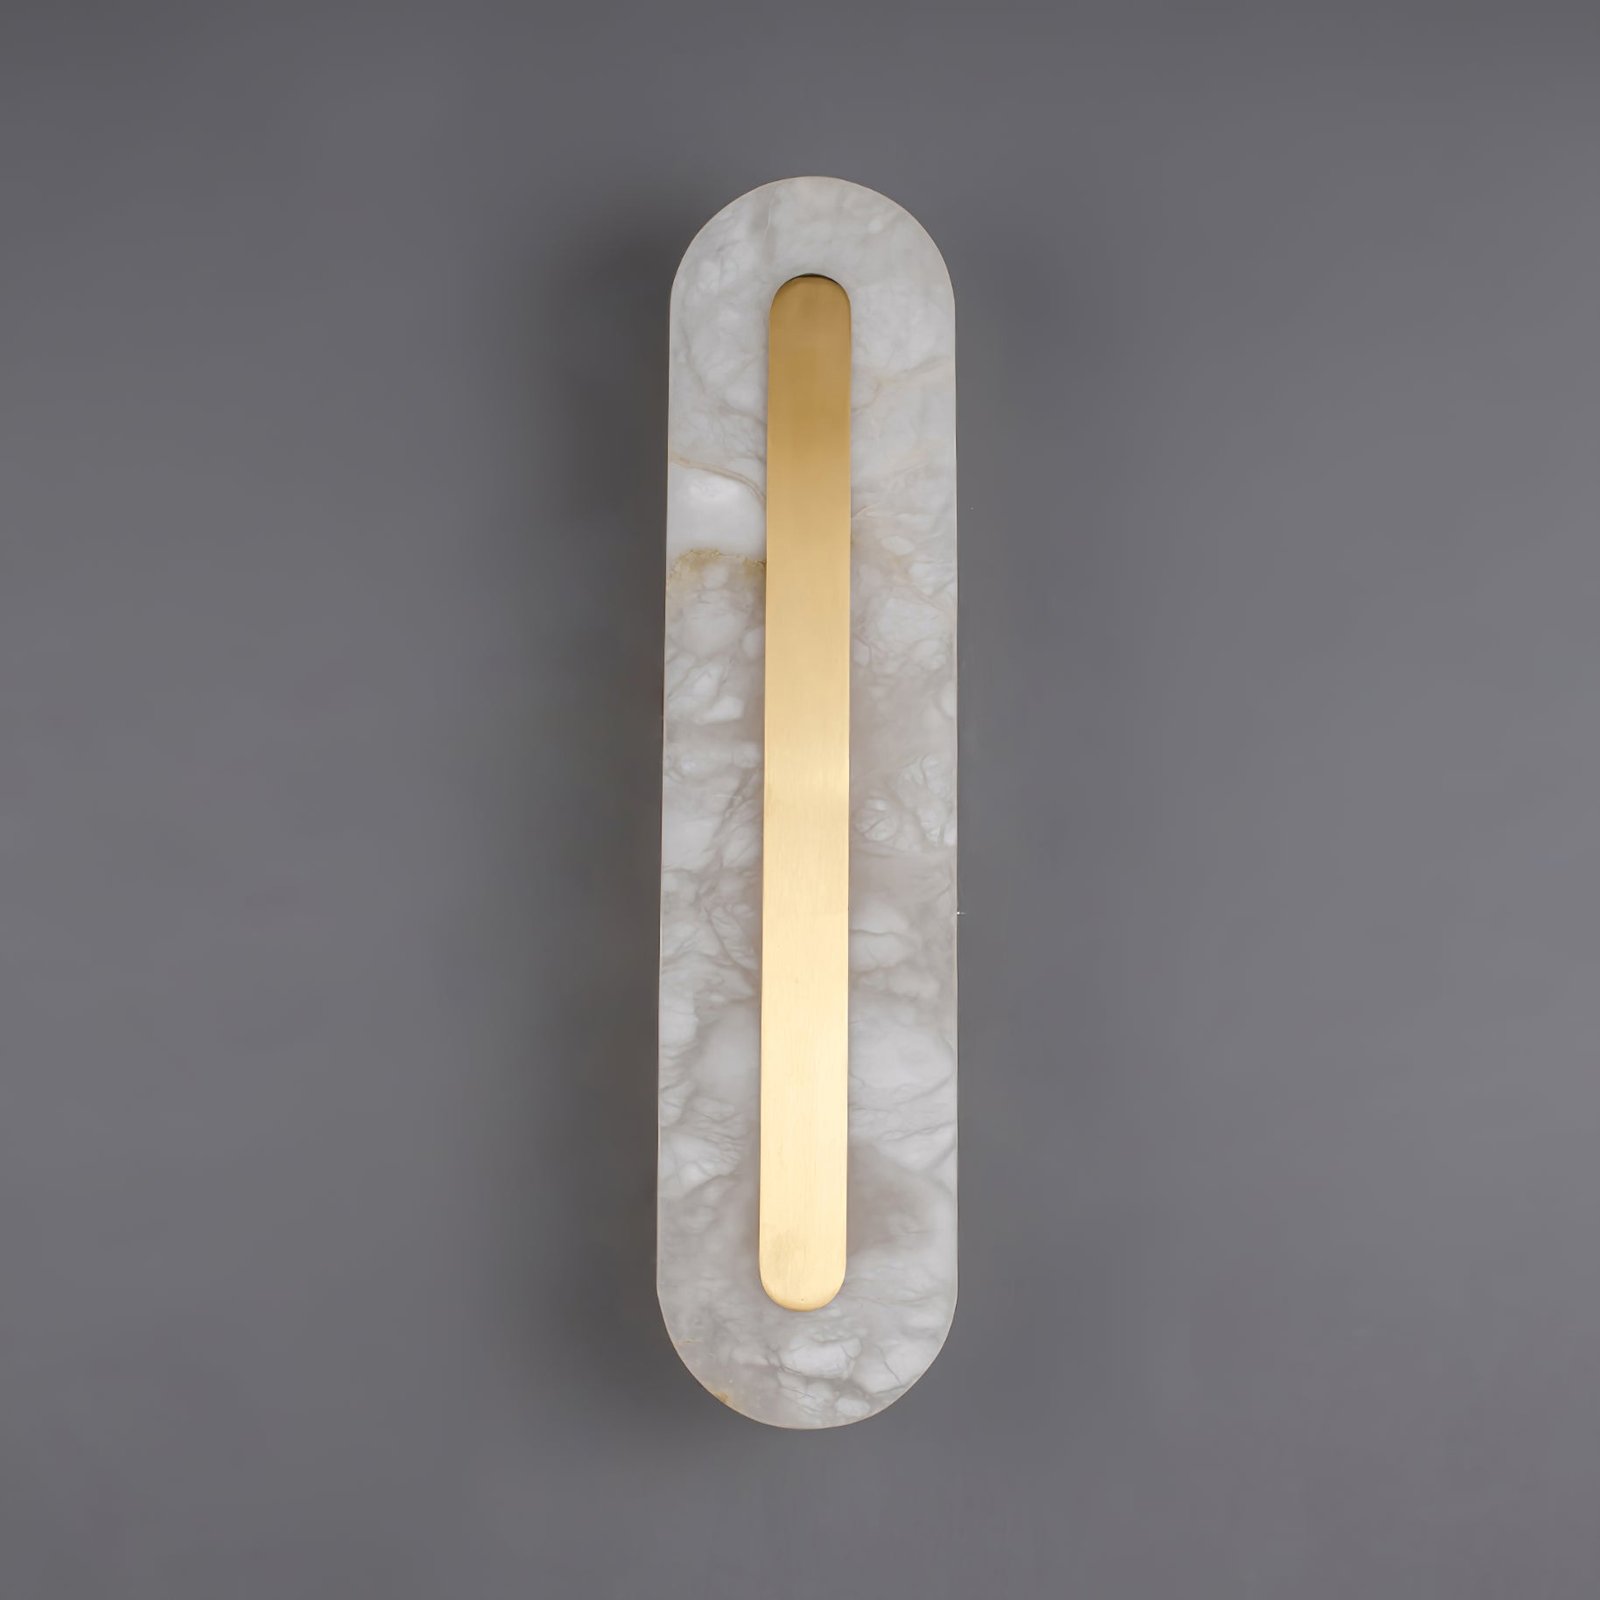 Marble Rounded Wall Lights - Set of 2, White & Brass, Cool Light, 5.5 inch Diameter, 23.6 inch Height